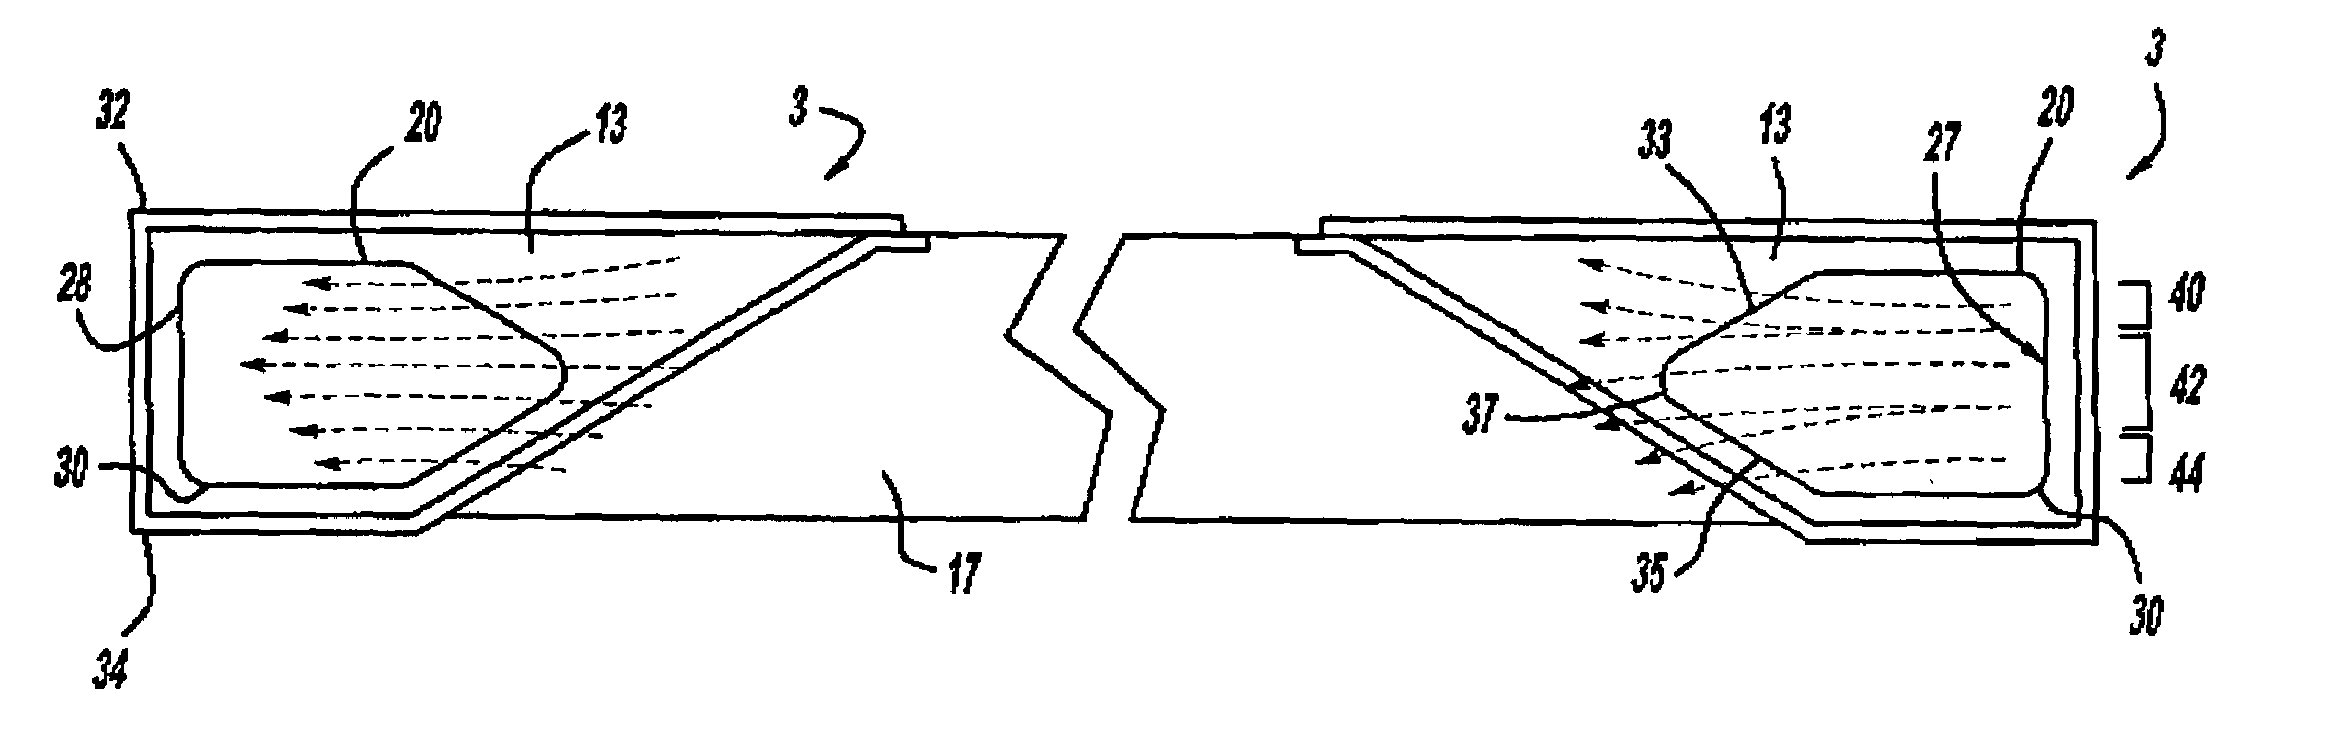 Method and apparatus for enhancing the heat transfer efficiency of a keel cooler